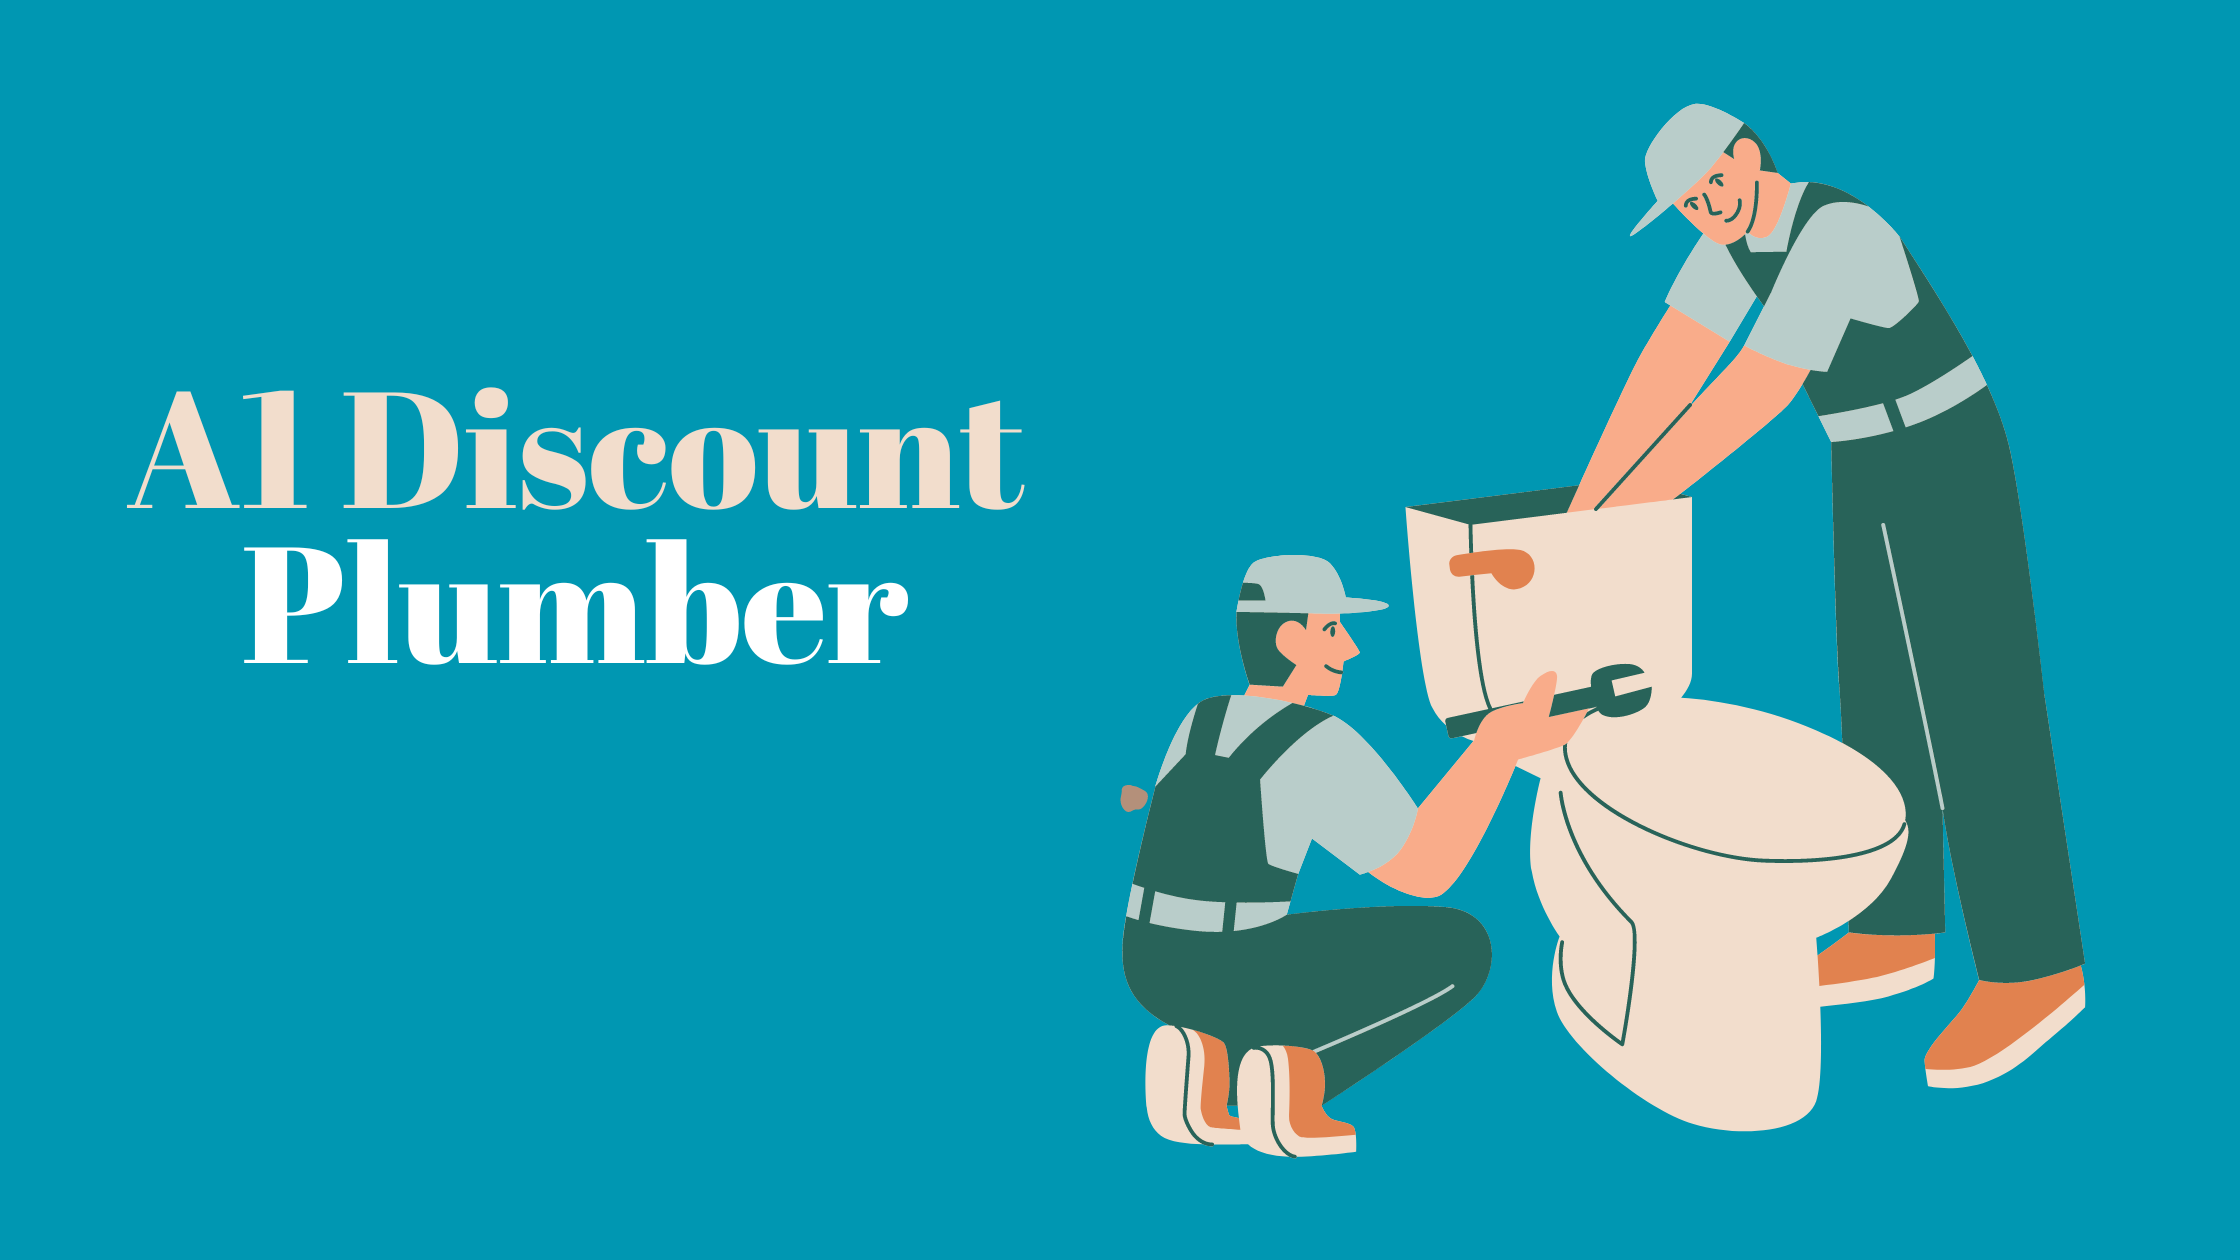 a1 discount plumber offers best plumbing services